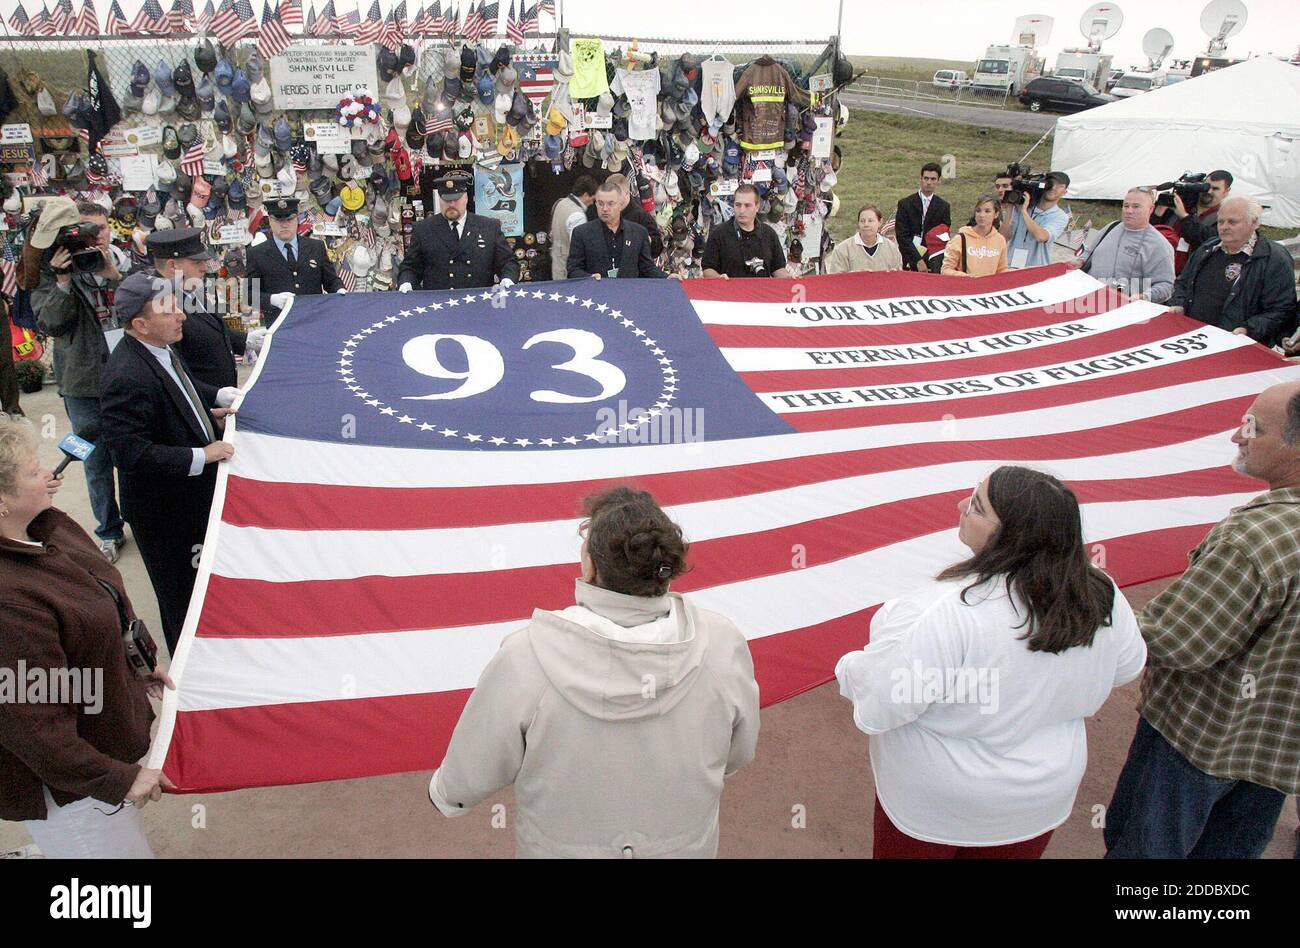 NO FILM, NO VIDEO, NO TV, NO DOCUMENTARY - Visitors unfurl a flag at the temporary memorial for the Flight 93 crash site in Shanksville, Pennsylvania, during the fifth anniversary of the 9/11 terrorist attacks on September 11, 2006. Photo by Laurence Kesterson/Philadelphia Inquirer/MCT/ABACAPRESS.COM Stock Photo